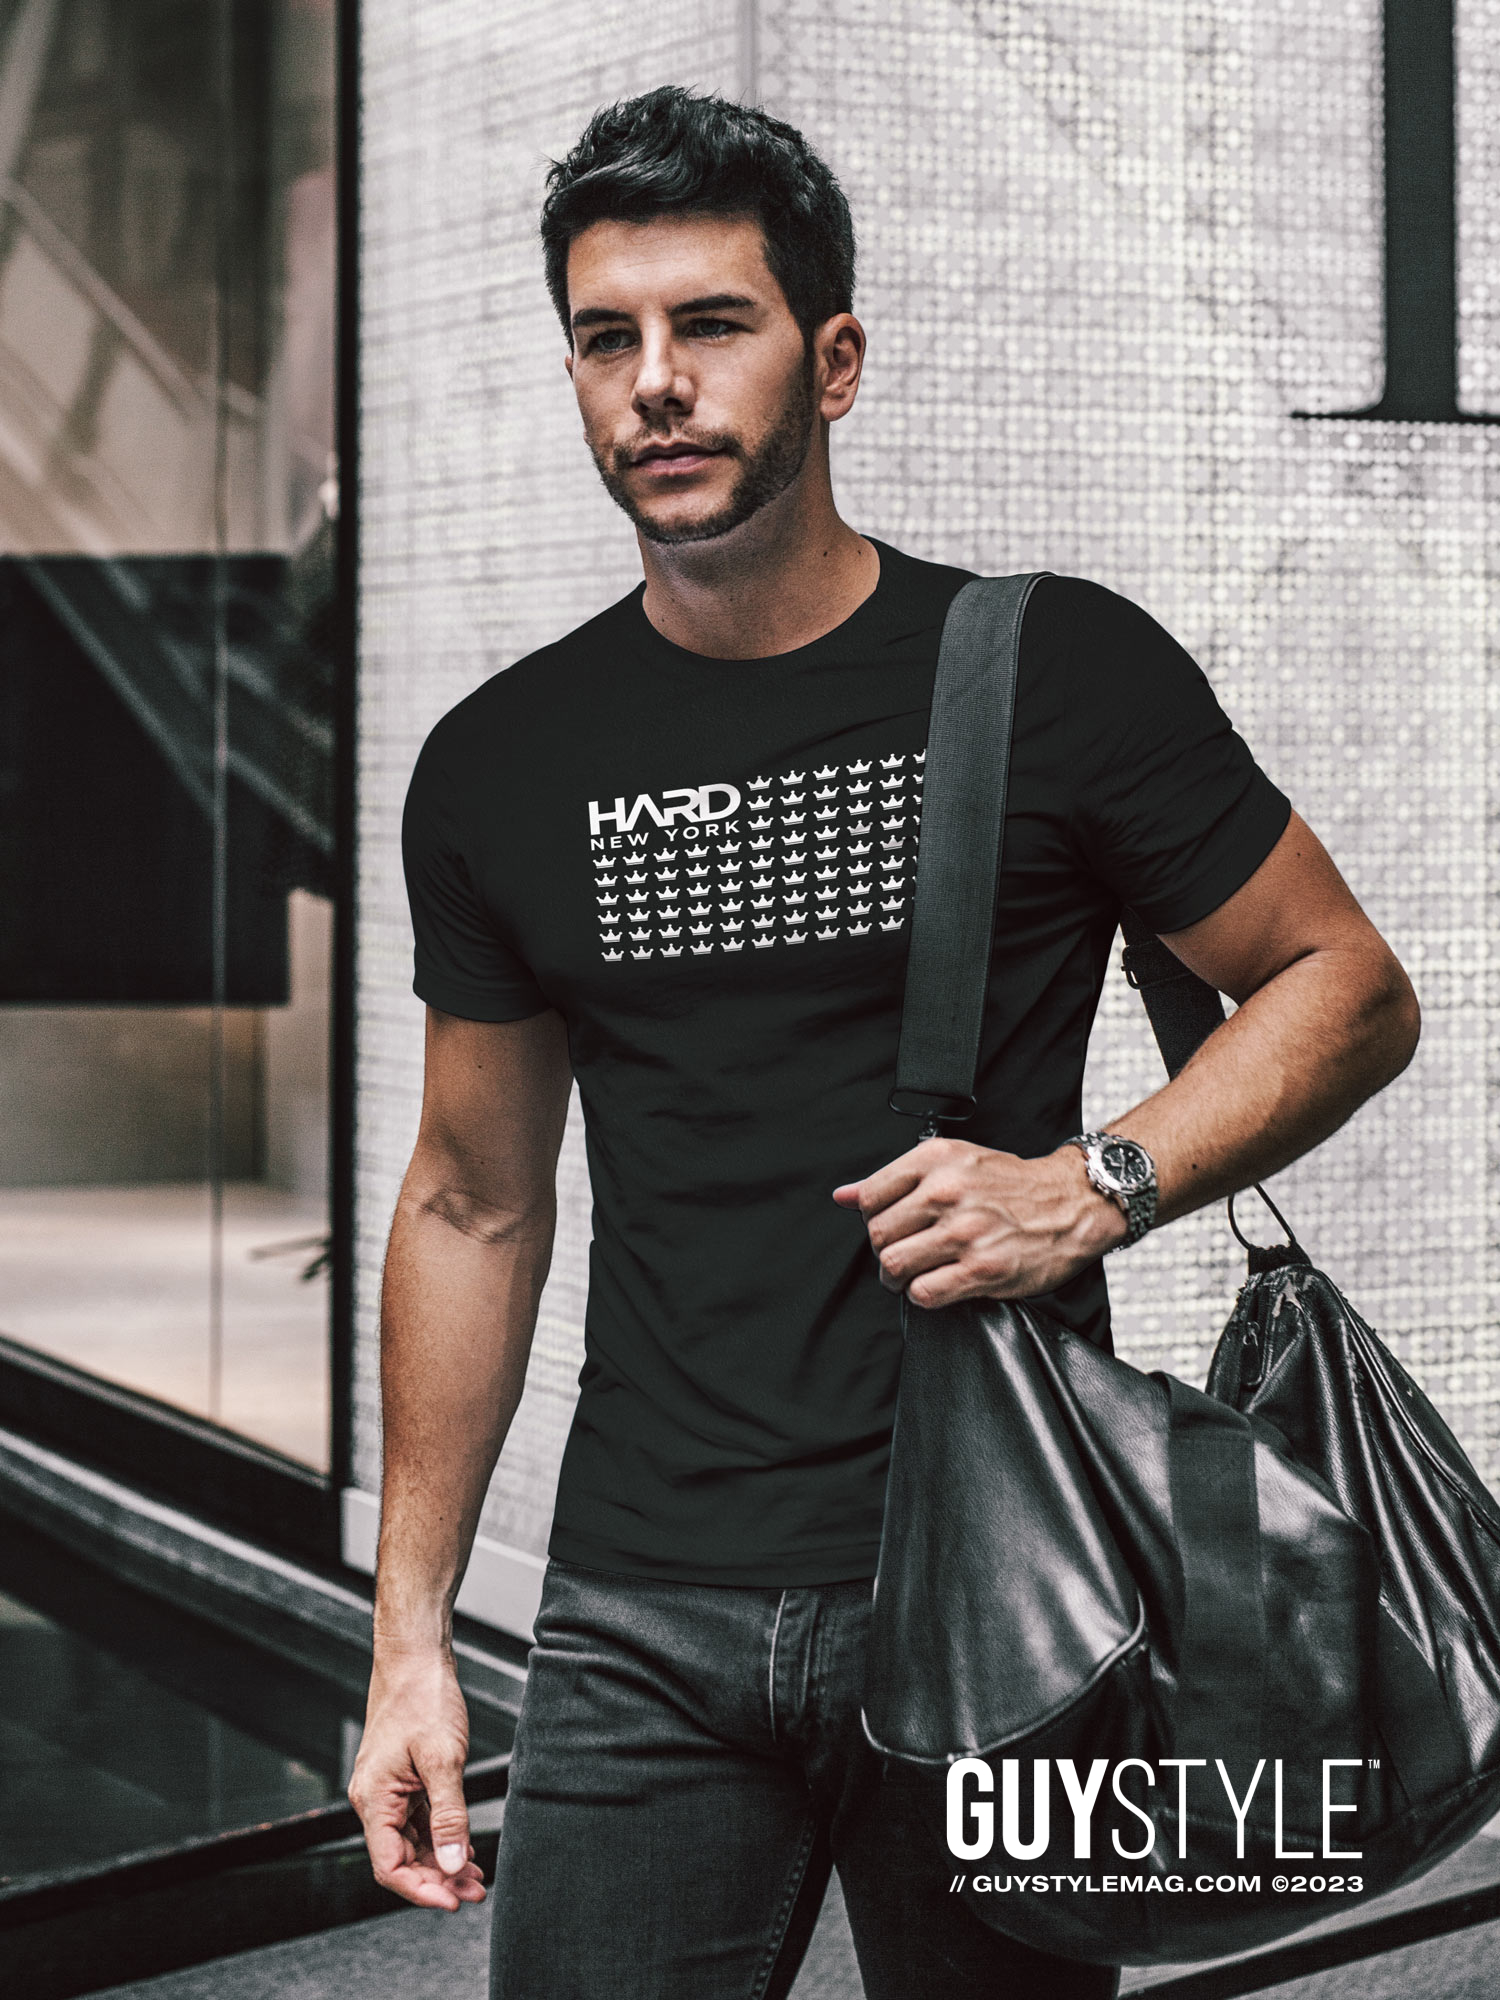 The Ultimate Guide to Stylish Men's Apparel: Discover the Best with HARD NEW YORK – Presented by HARD NEW YORK – Fashion Accessories for Grown Up Men